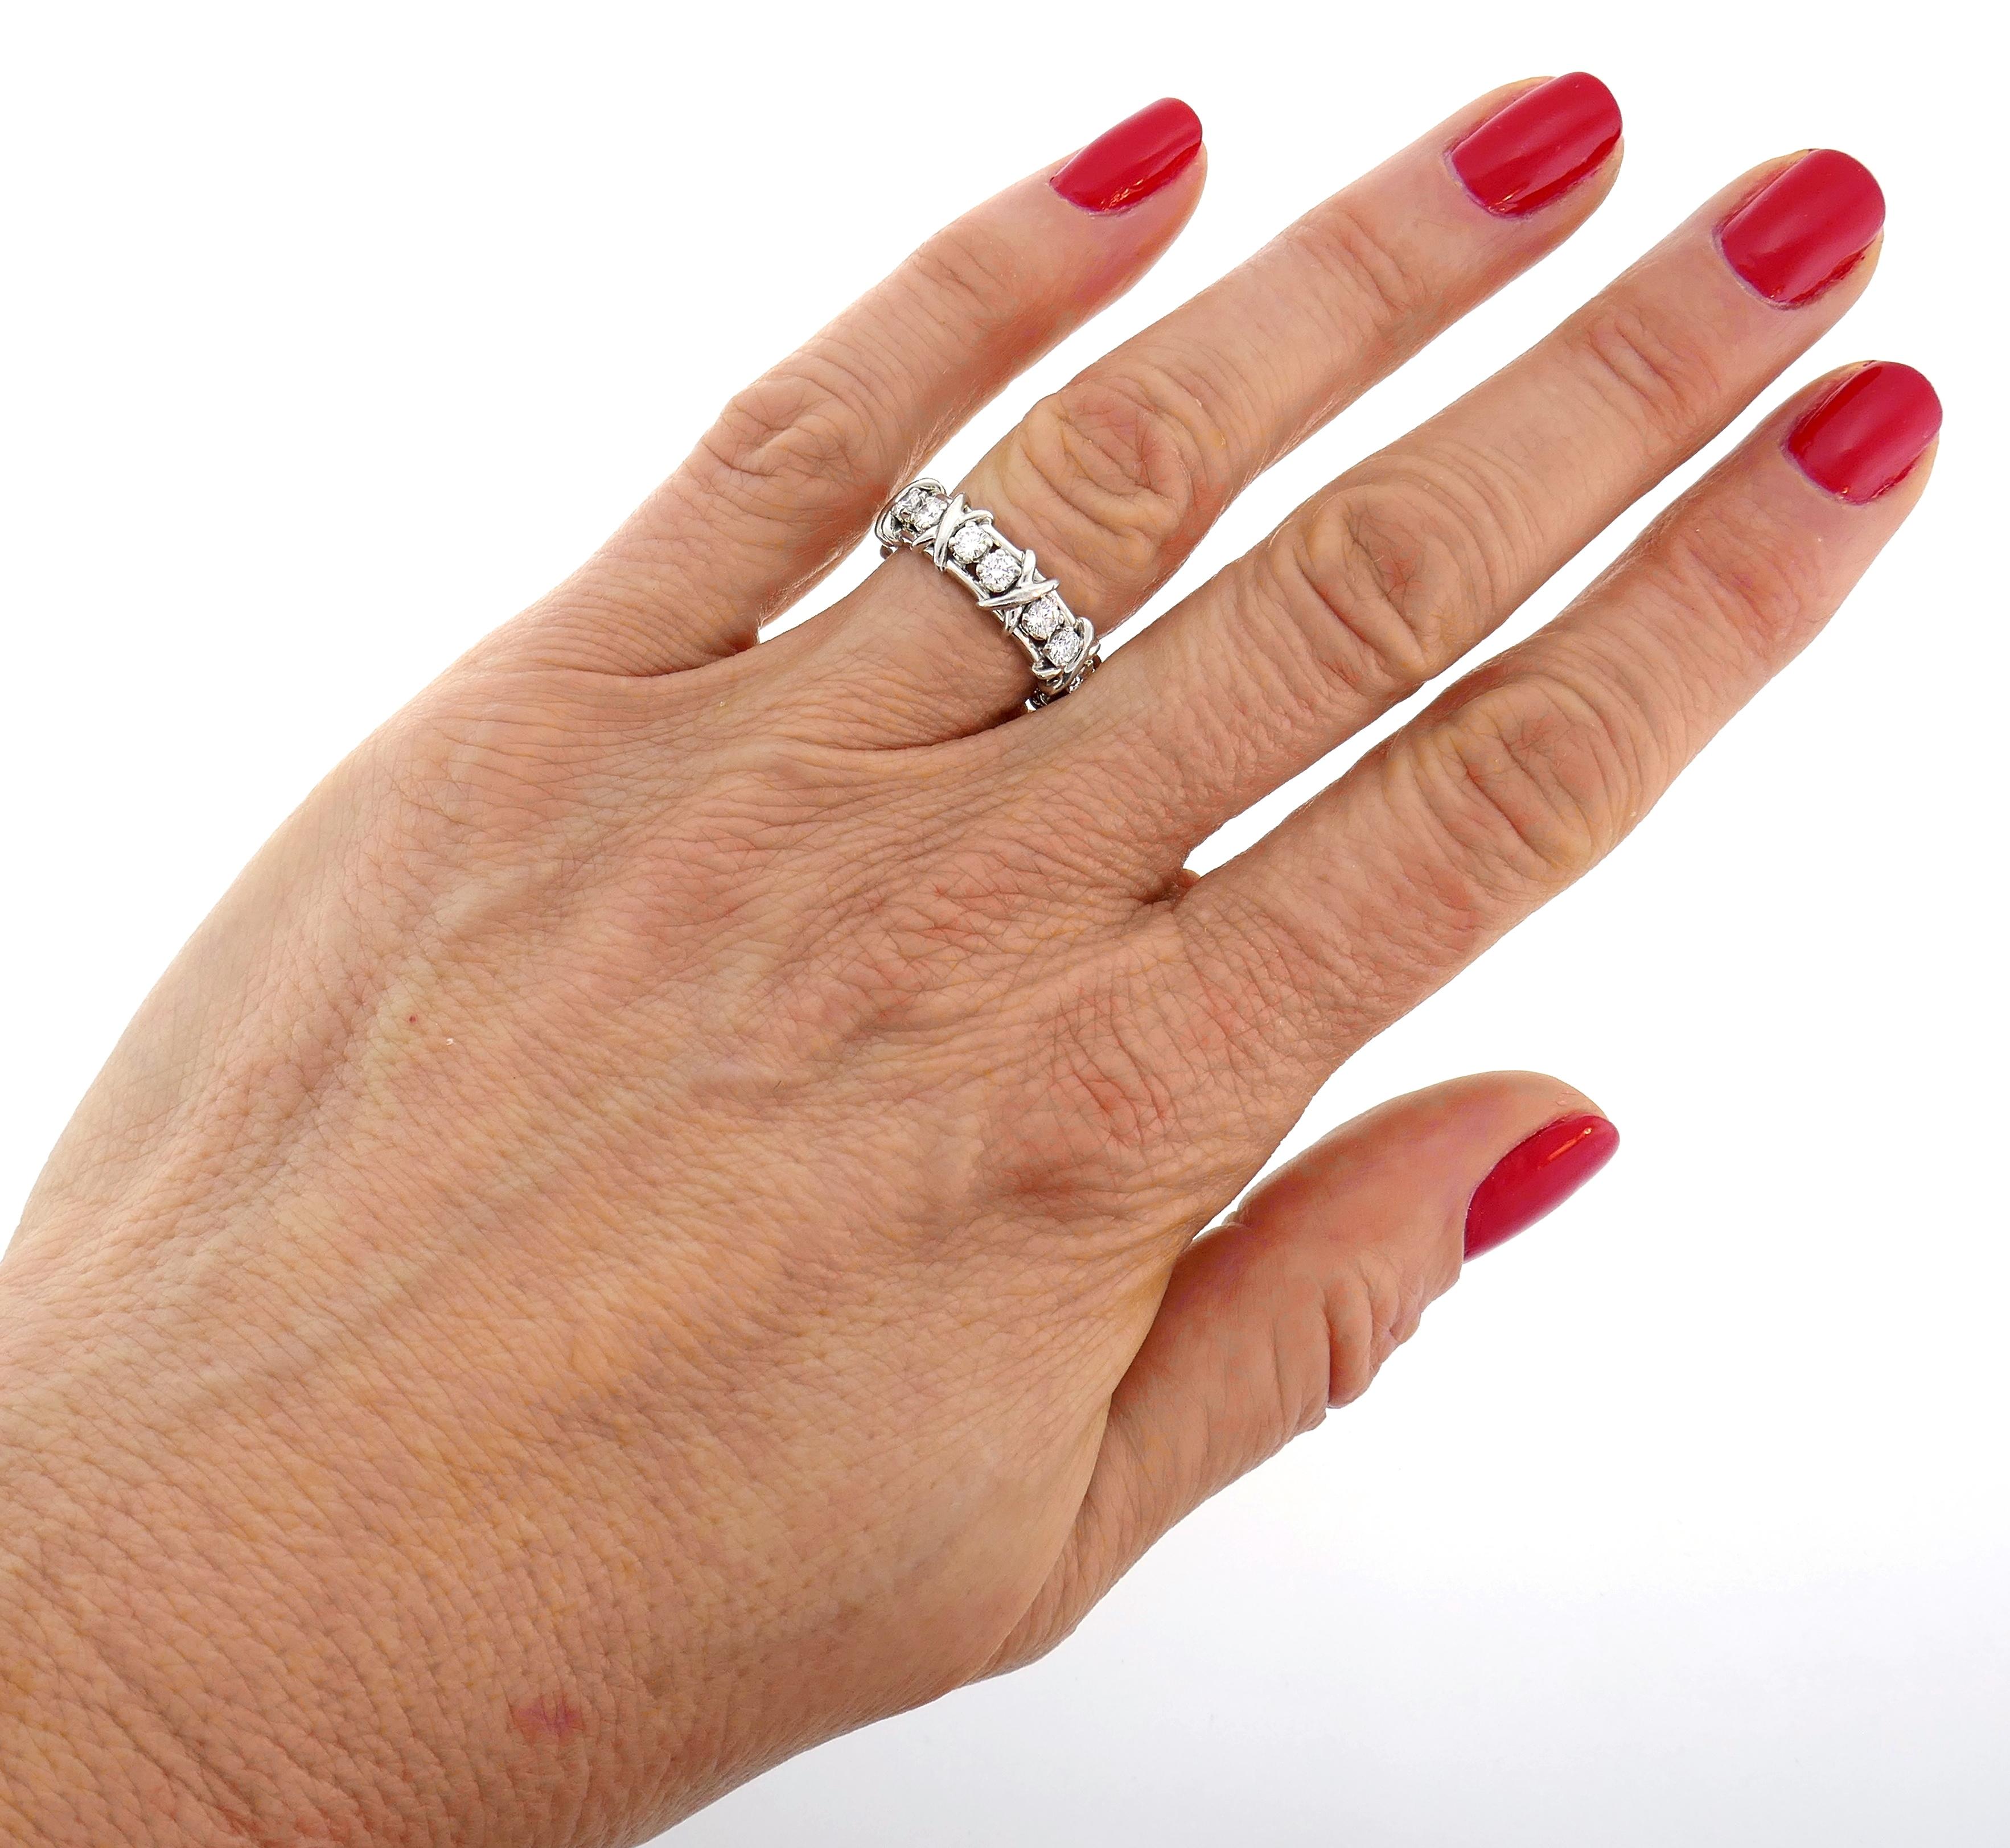 Timeless and elegant band ring created by Jean Schlumberger for Tiffany & Co. Classic design, perfect proportions. Elegant and timeless, the band is a great addition to your jewelry collection. 
The ring is made of platinum and set with sixteen